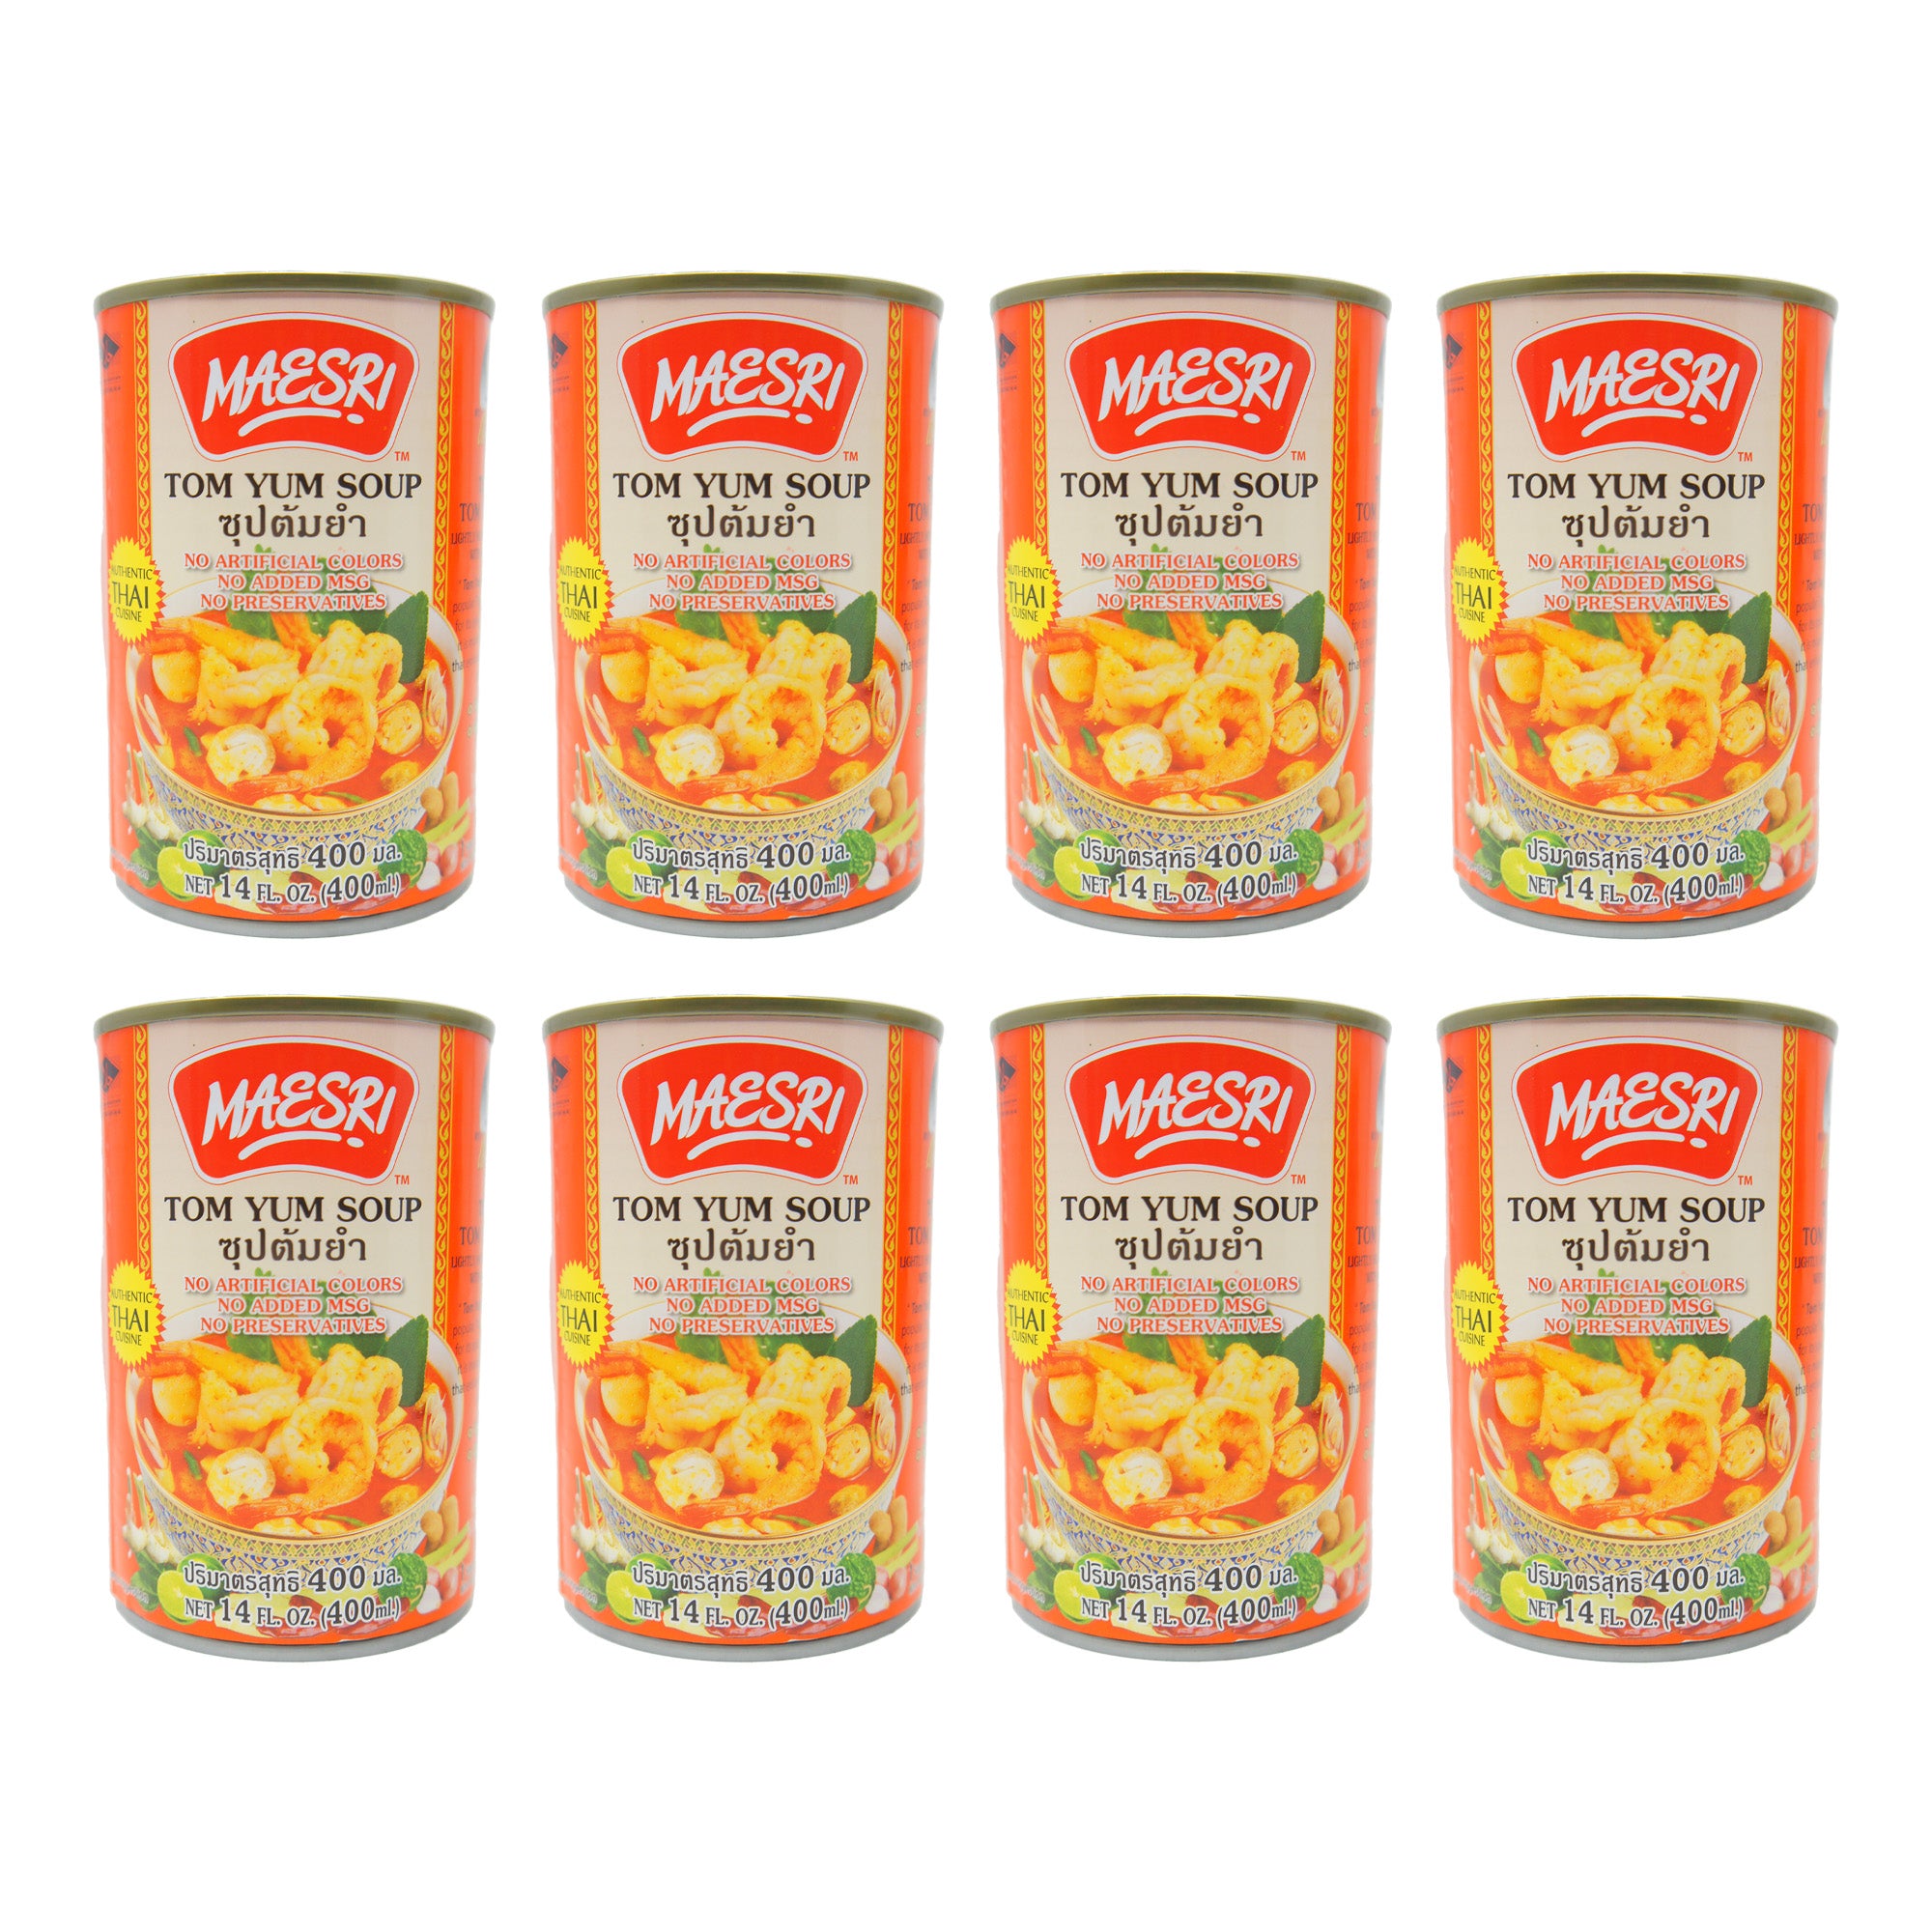 Maesri Tom Yum Soup, 14 fl oz Can, Product of Thailand (8 Pack)